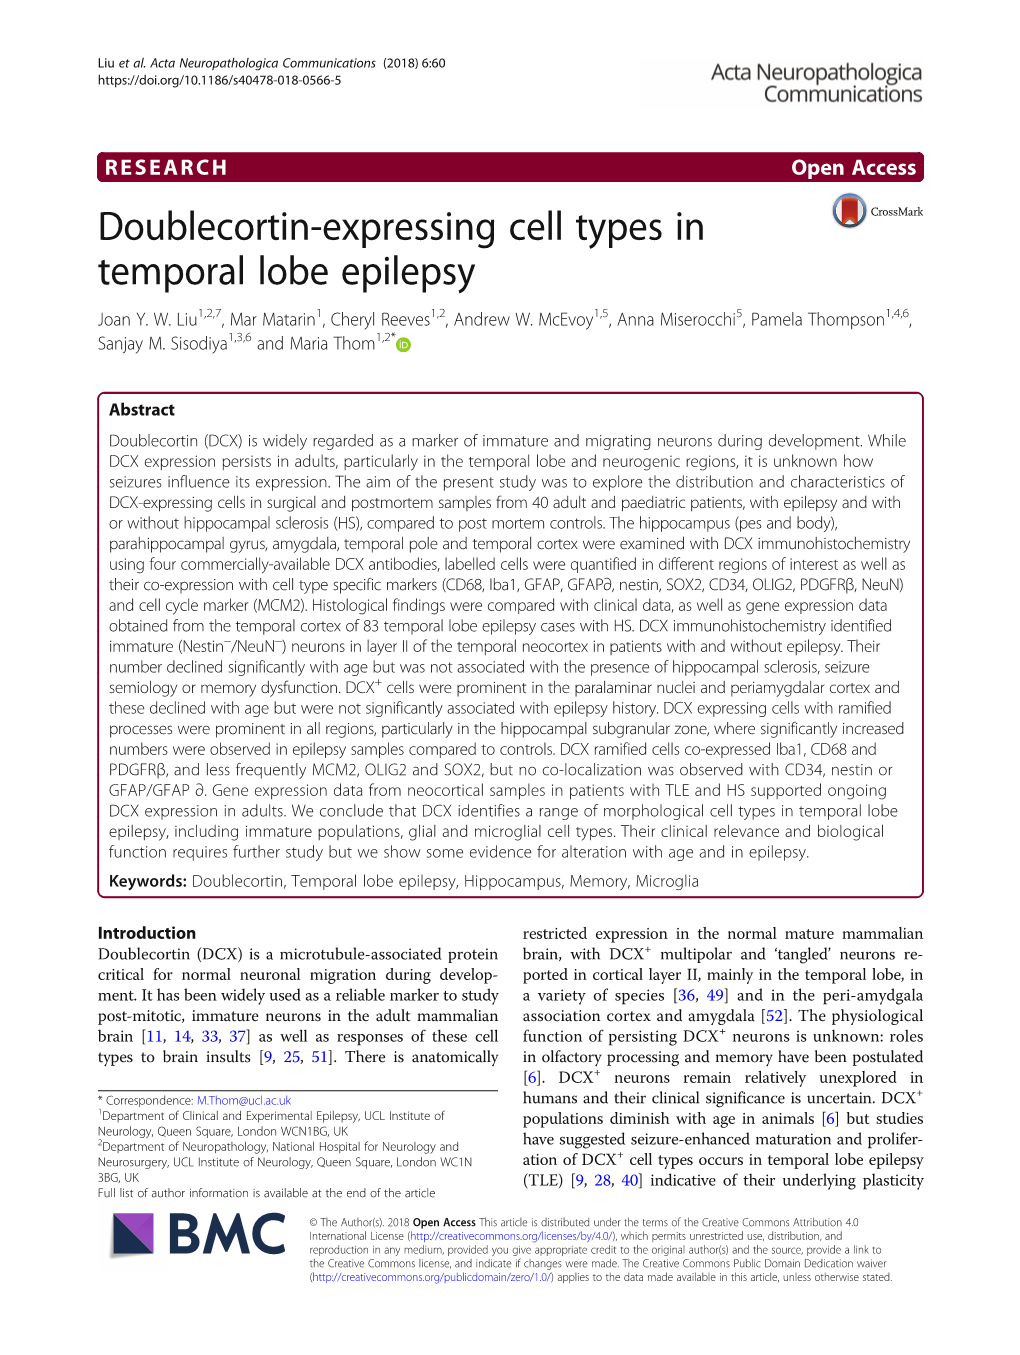 Doublecortin-Expressing Cell Types in Temporal Lobe Epilepsy Joan Y